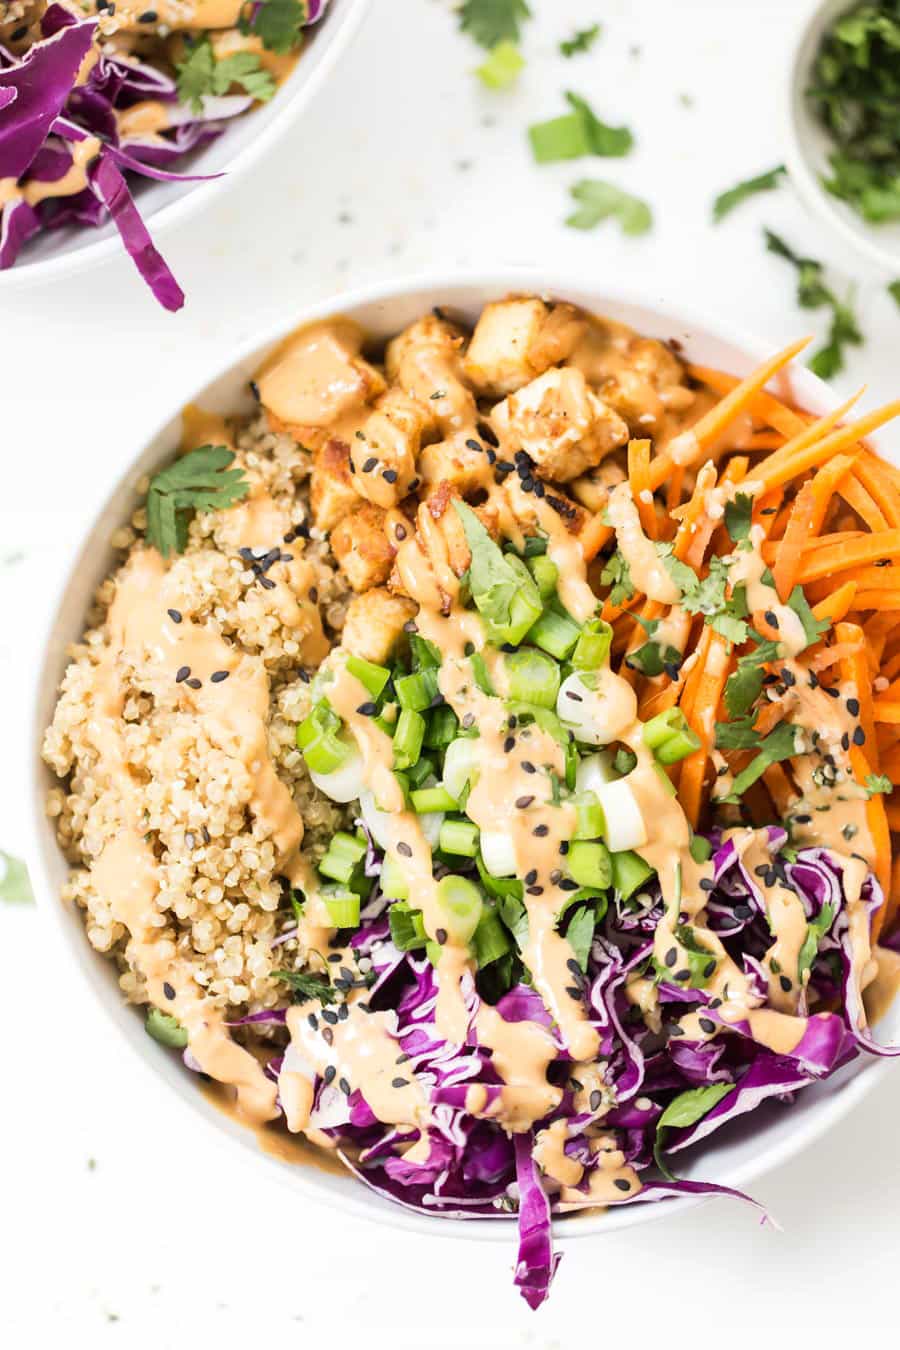 Asian Quinoa Bowls with Peanut Baked Tofu -- use up the veggies in your fridge to whip up this TASTY bowl meal!